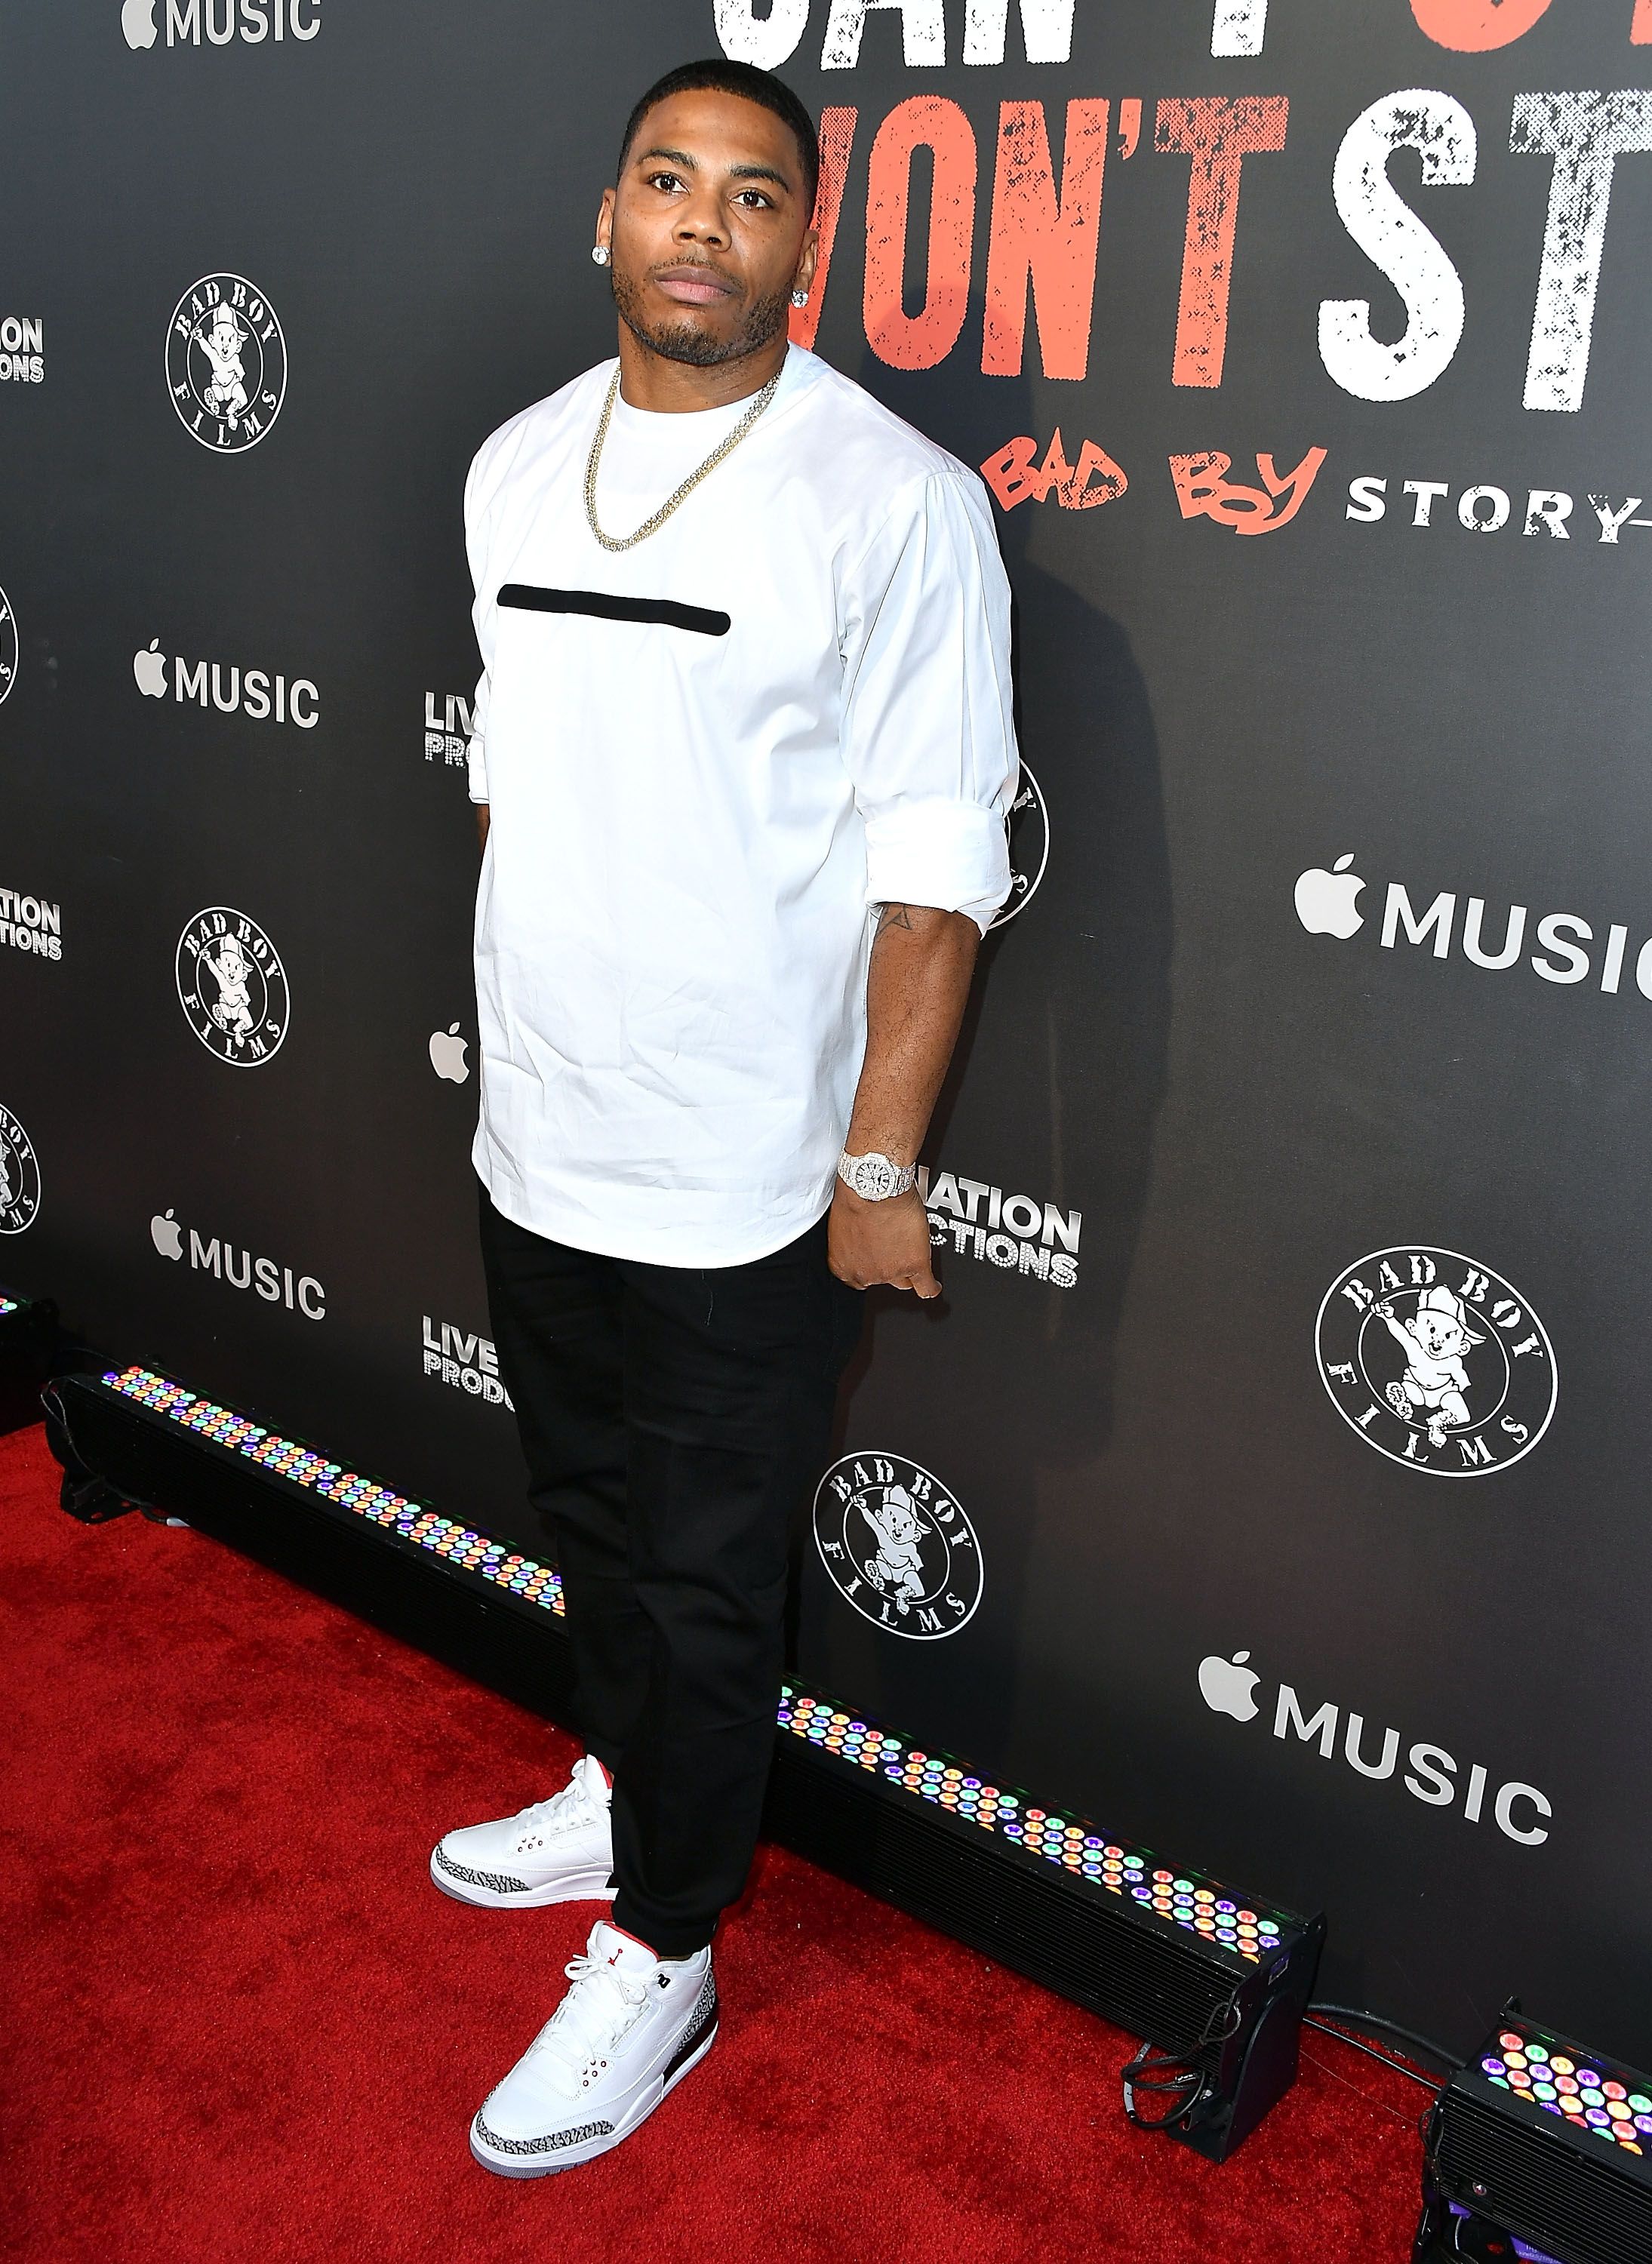  Nelly at the Los Angeles Premiere Of "Can't Stop Won't Stop" at Writers Guild of America, West on June 21, 2017 in Los Angeles, California | Photo: Getty Images